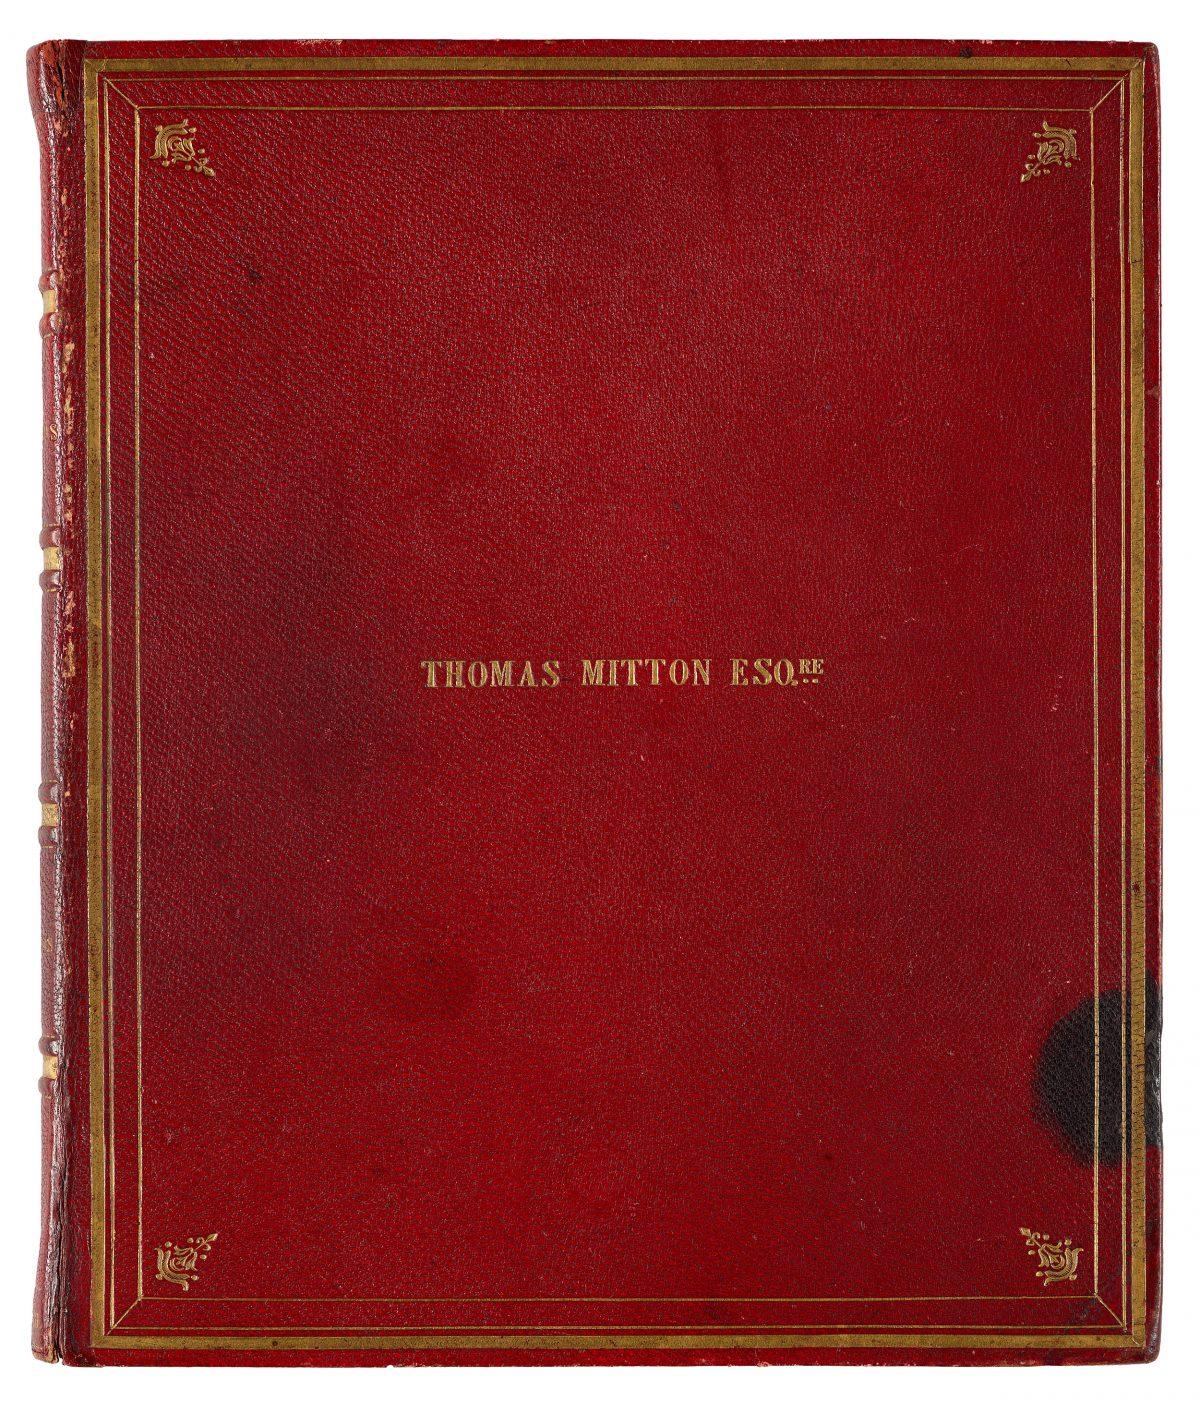 <span style="color: #000000;">The front cover of "A Christmas Carol in Prose: Being a Ghost Story of Christmas," December 1843, by Charles Dickens. Autographed manuscript. Purchased by Pierpont Morgan before 1900. (Graham S. Haber/The Morgan Library & Museum)</span>